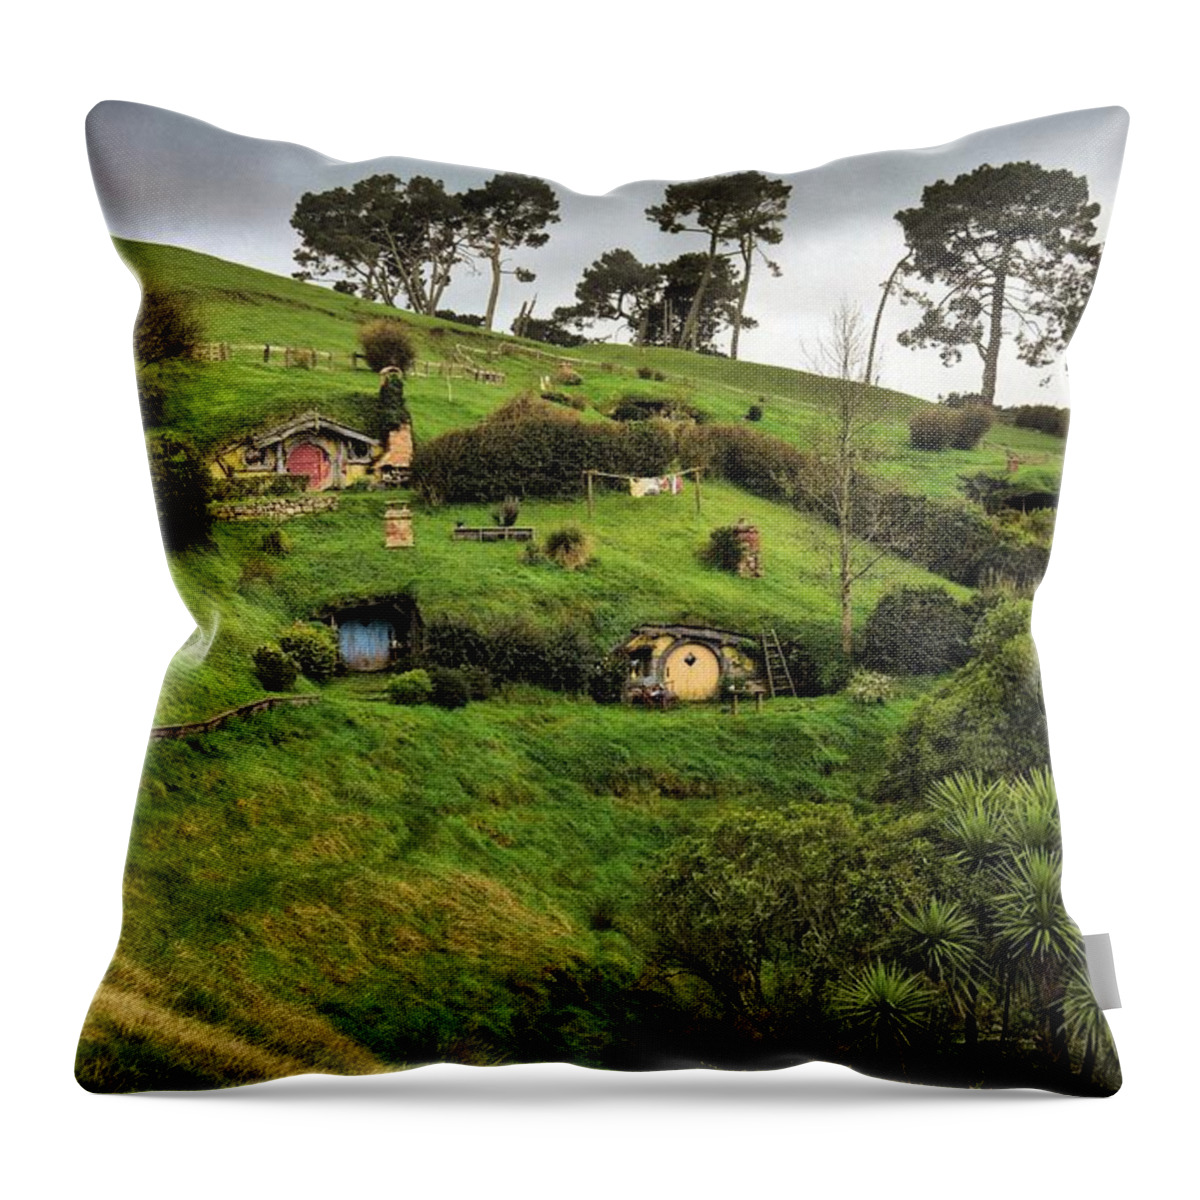 Photograph Throw Pillow featuring the photograph Hobbit Valley by Richard Gehlbach